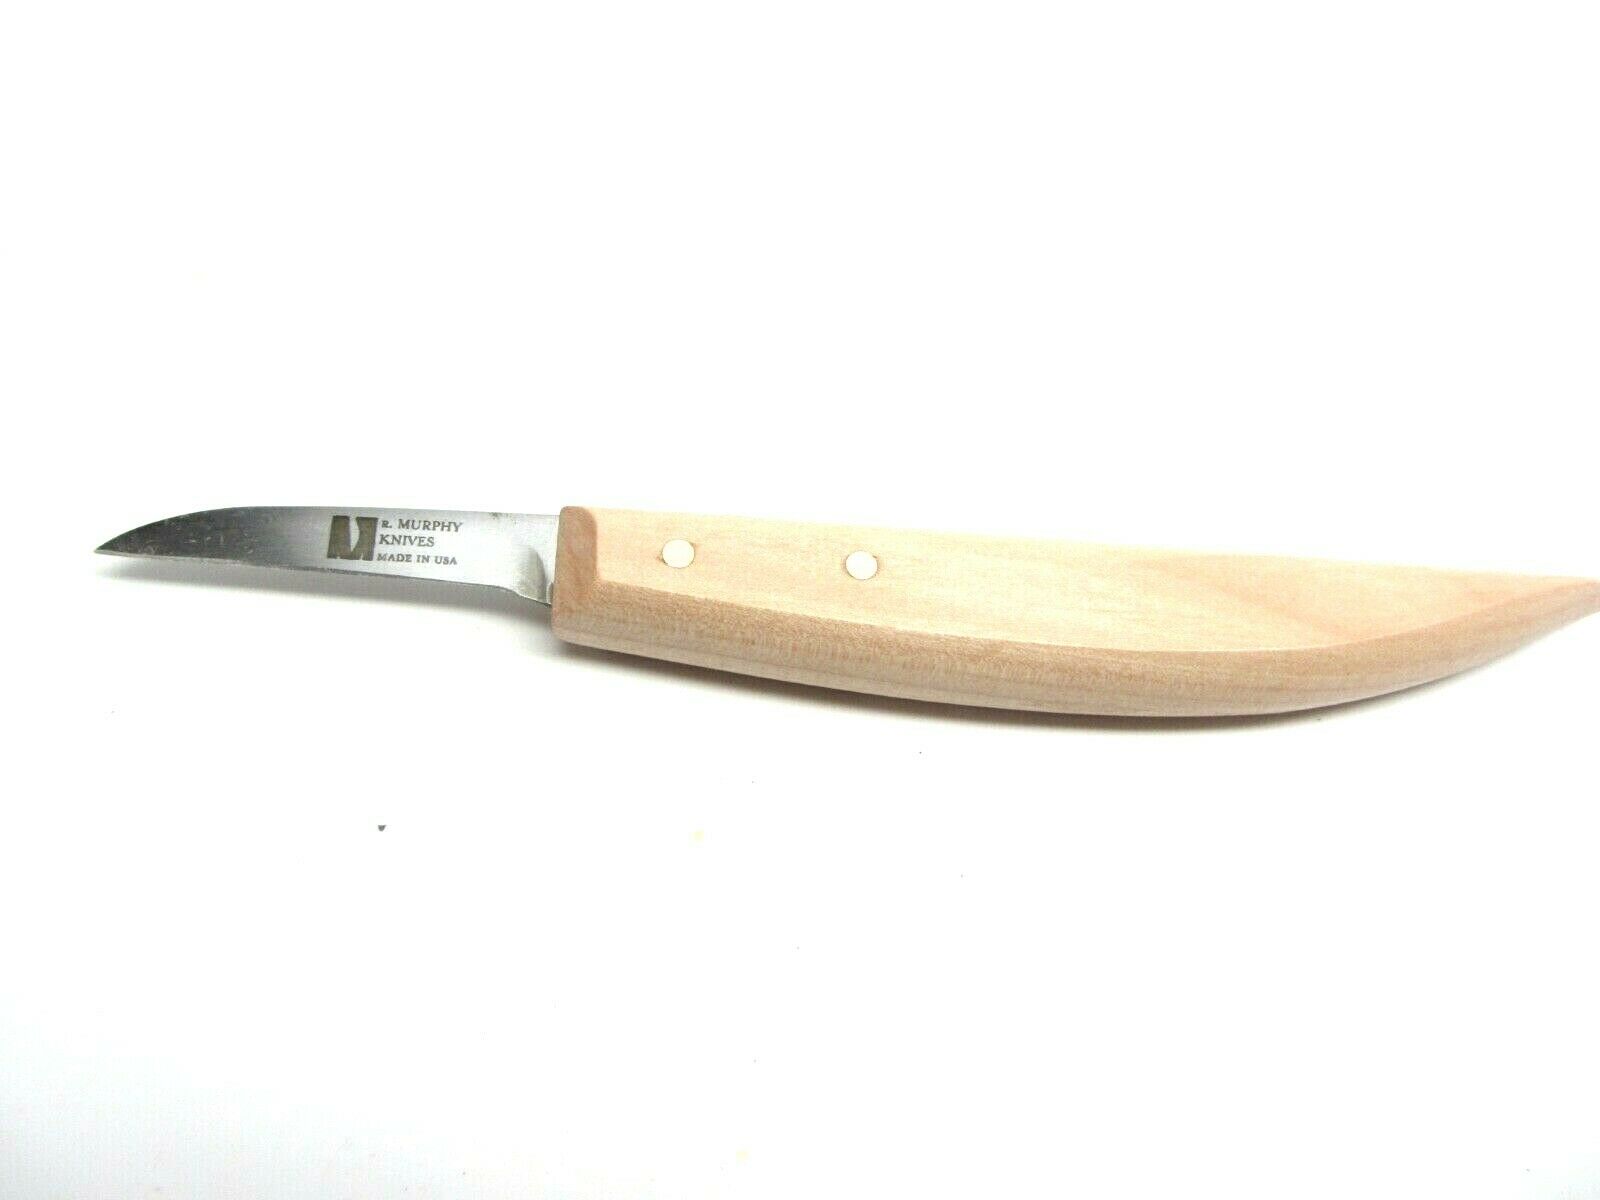 R. Murphy hand carving and dental lab knife from UJ Ramelson